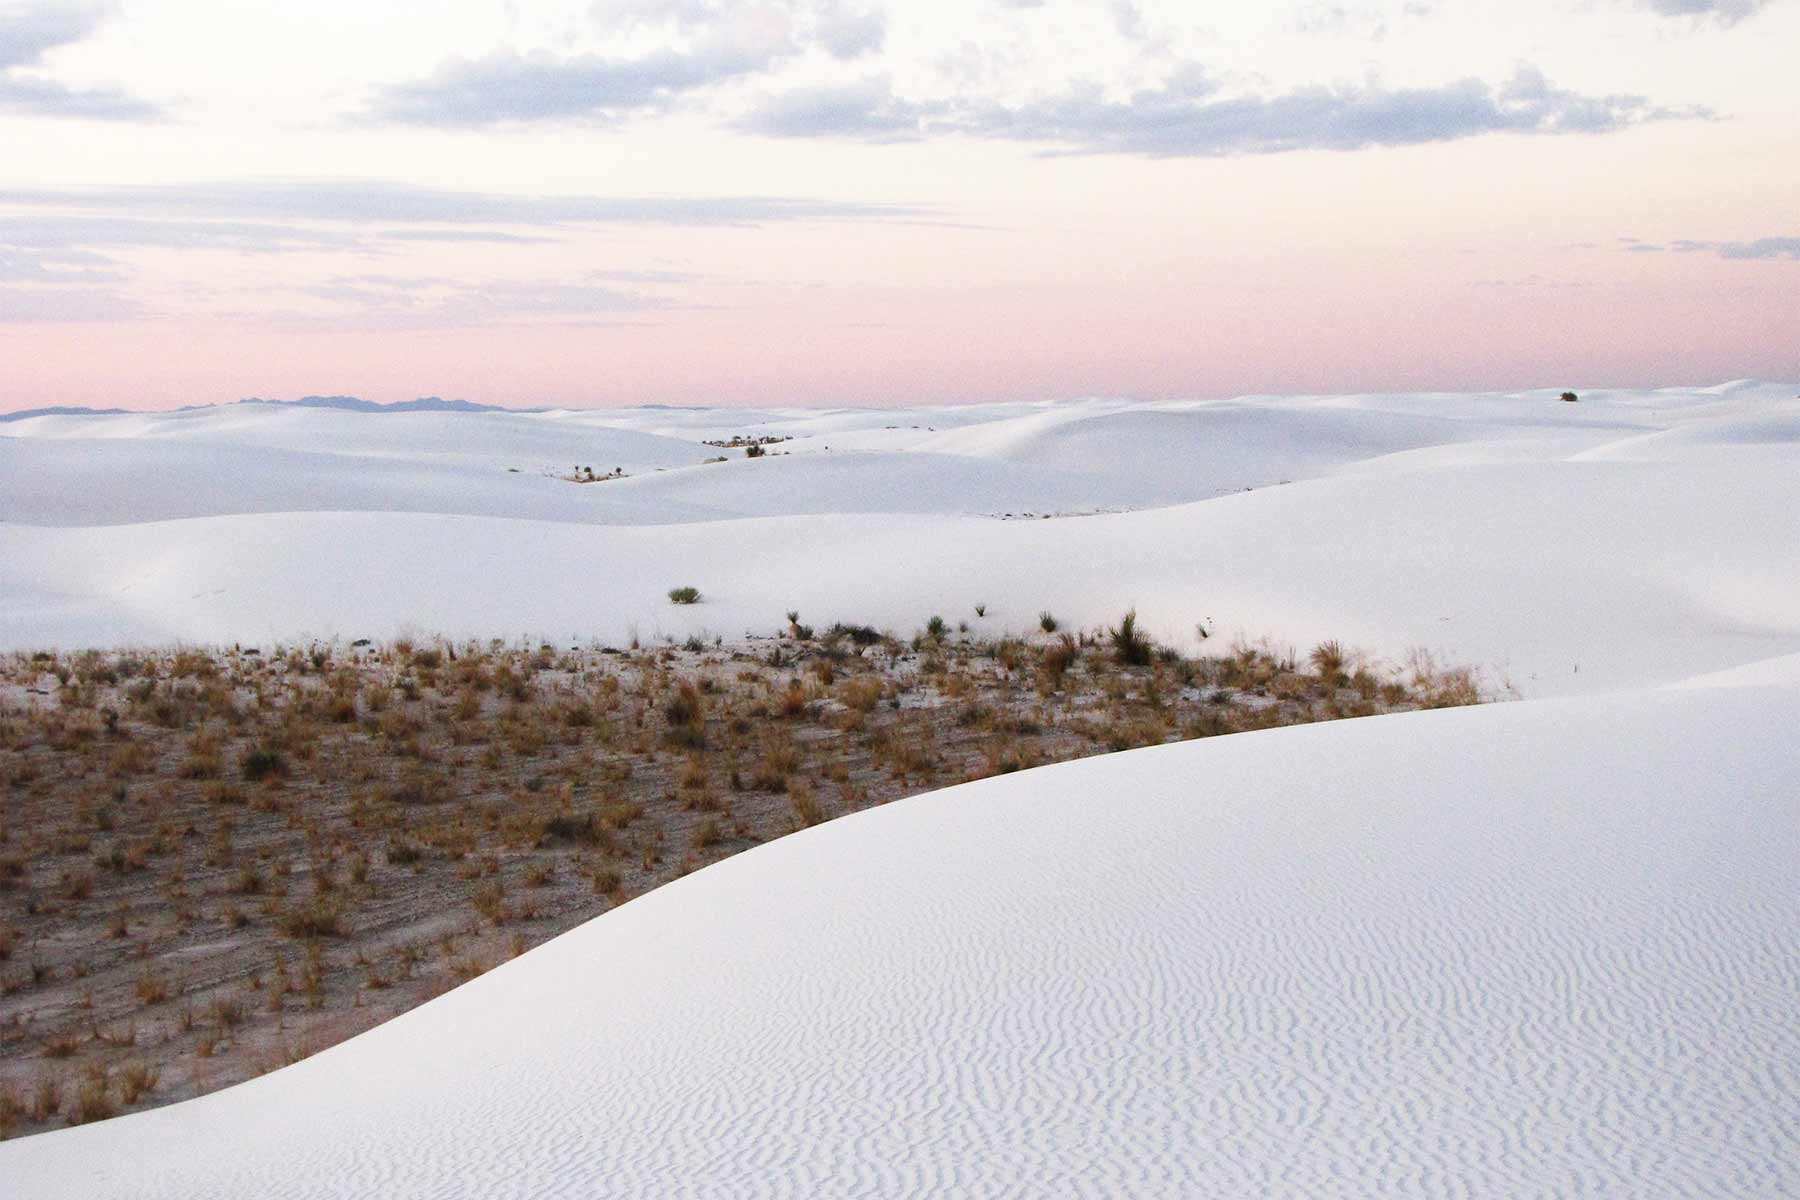 white sands national park new mexico